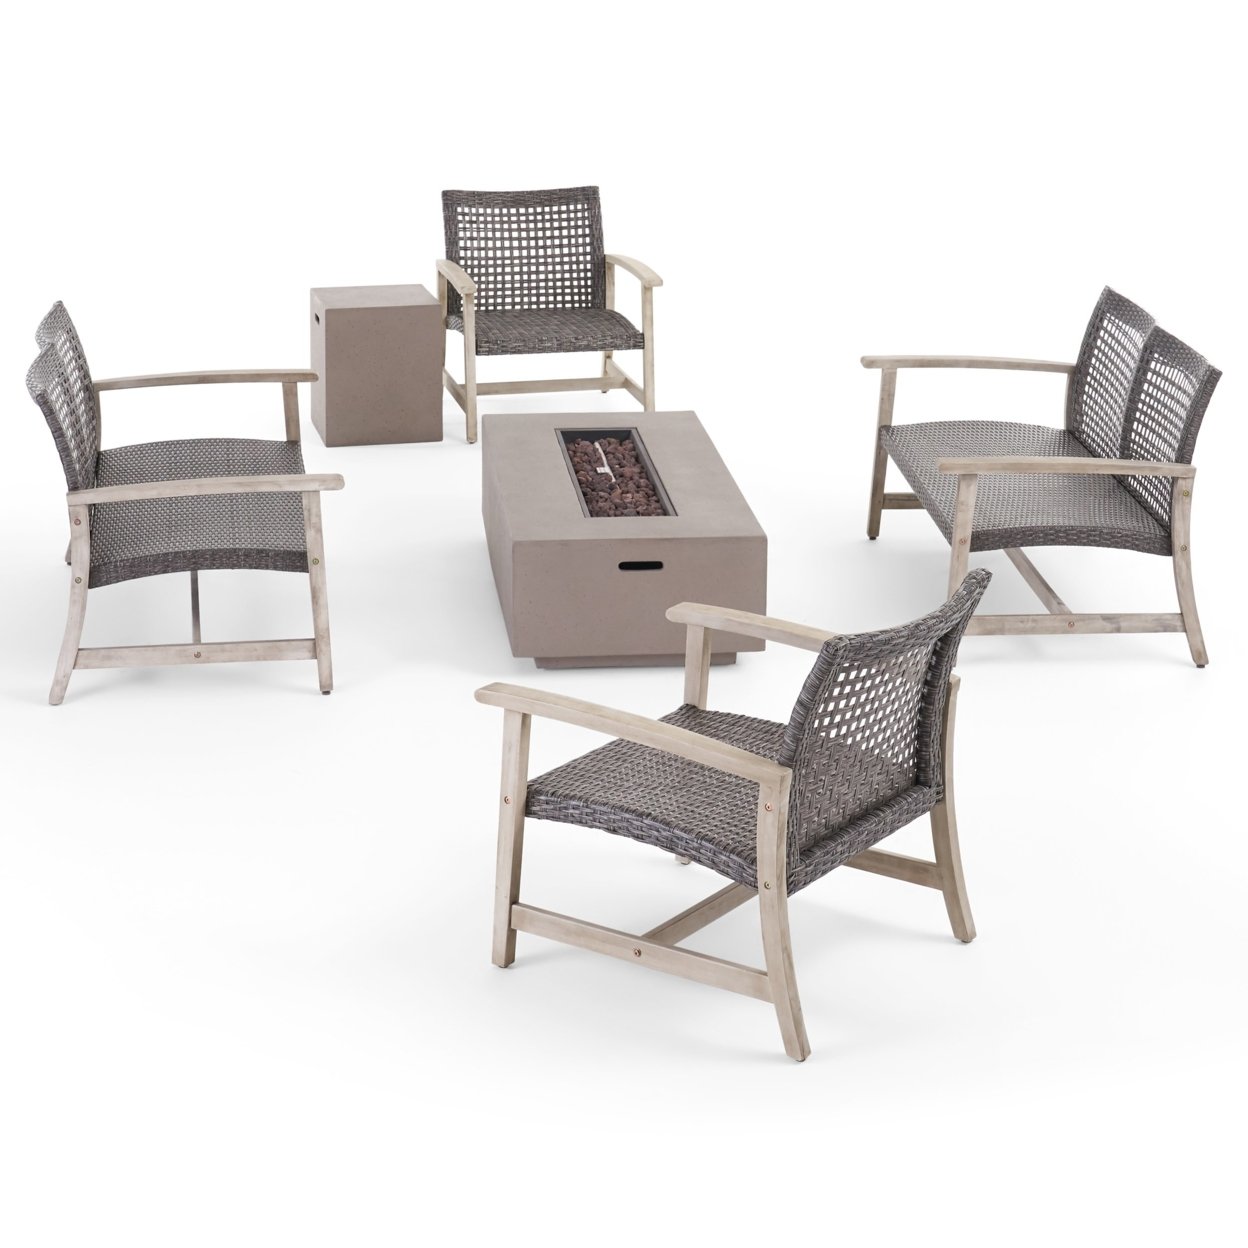 Allison Outdoor 6 Piece Wood And Wicker Chat Set With Fire Pit - Mixed Black, Light Gray Washed Finish